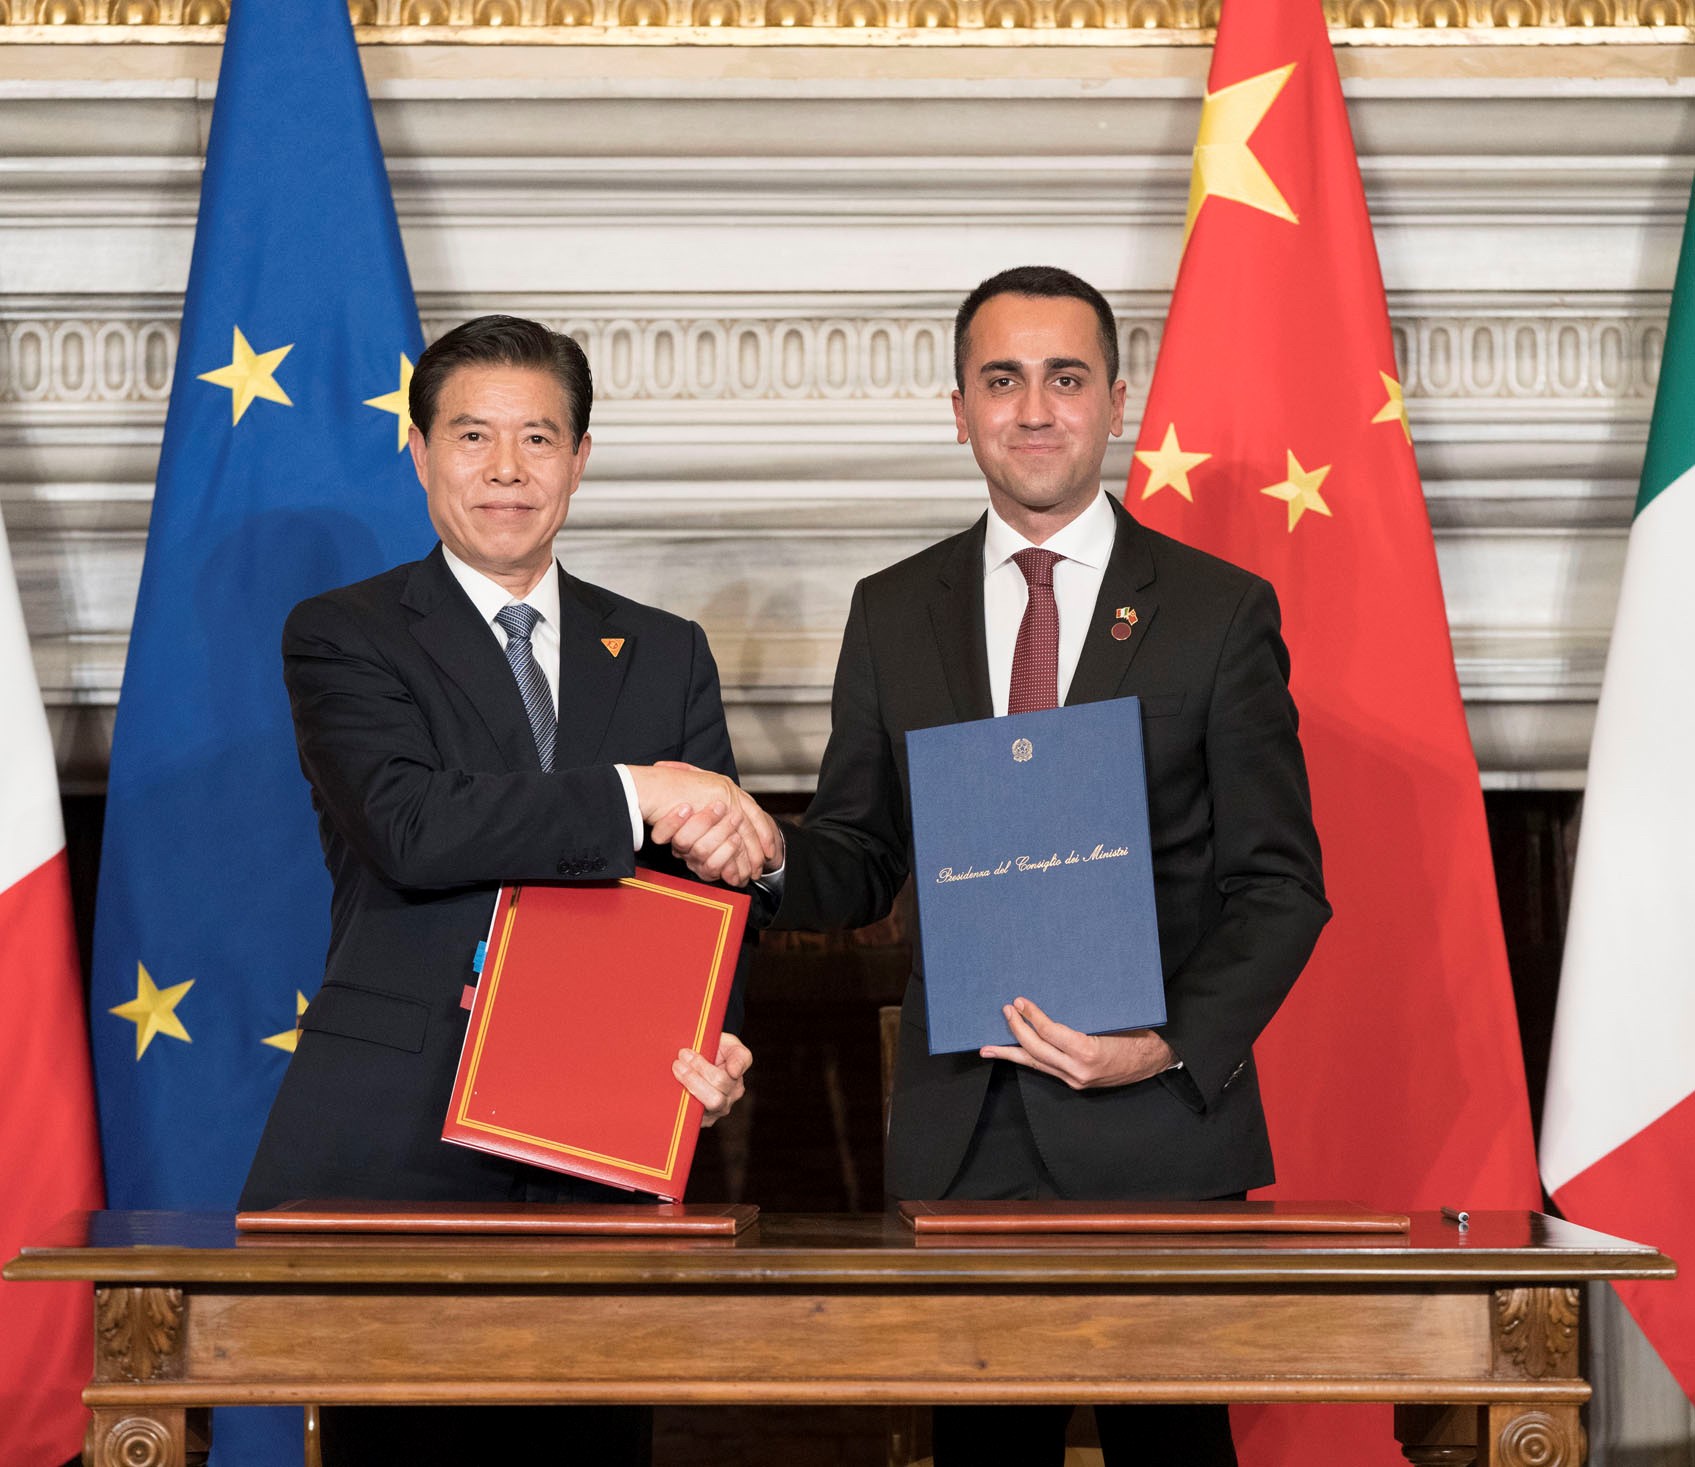 Italian Prime Minister Giuseppe Conte and Chinese President Xi Jinping signs (MoU) over Italy's joining China's Road and Belt Initiative